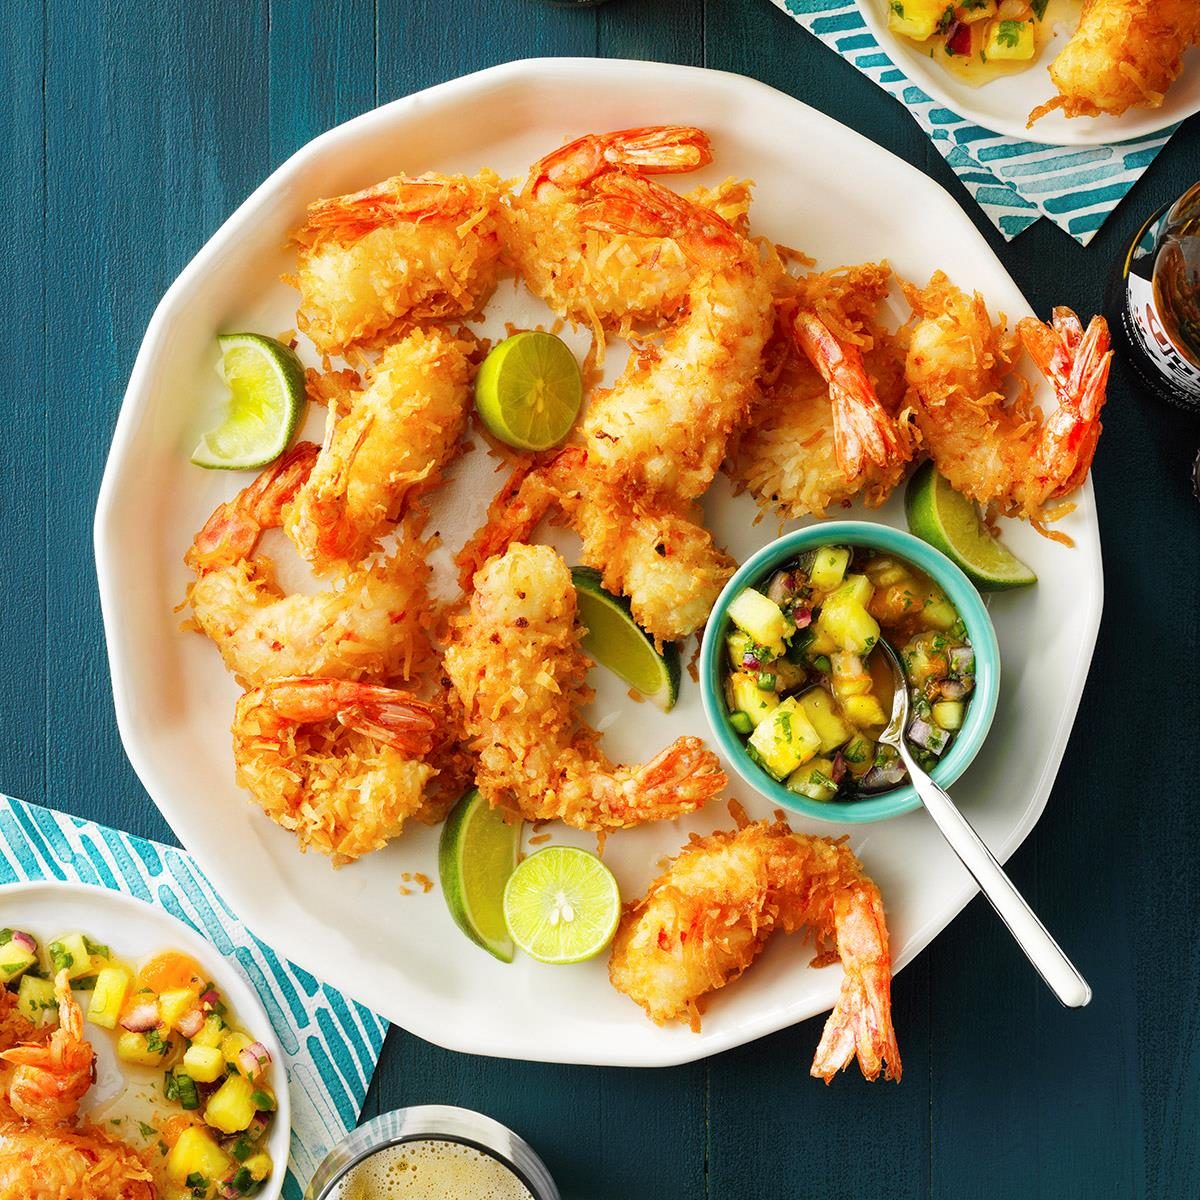 Whole30 Coconut-Crusted Shrimp with Pineapple-Chili Sauce Recipe